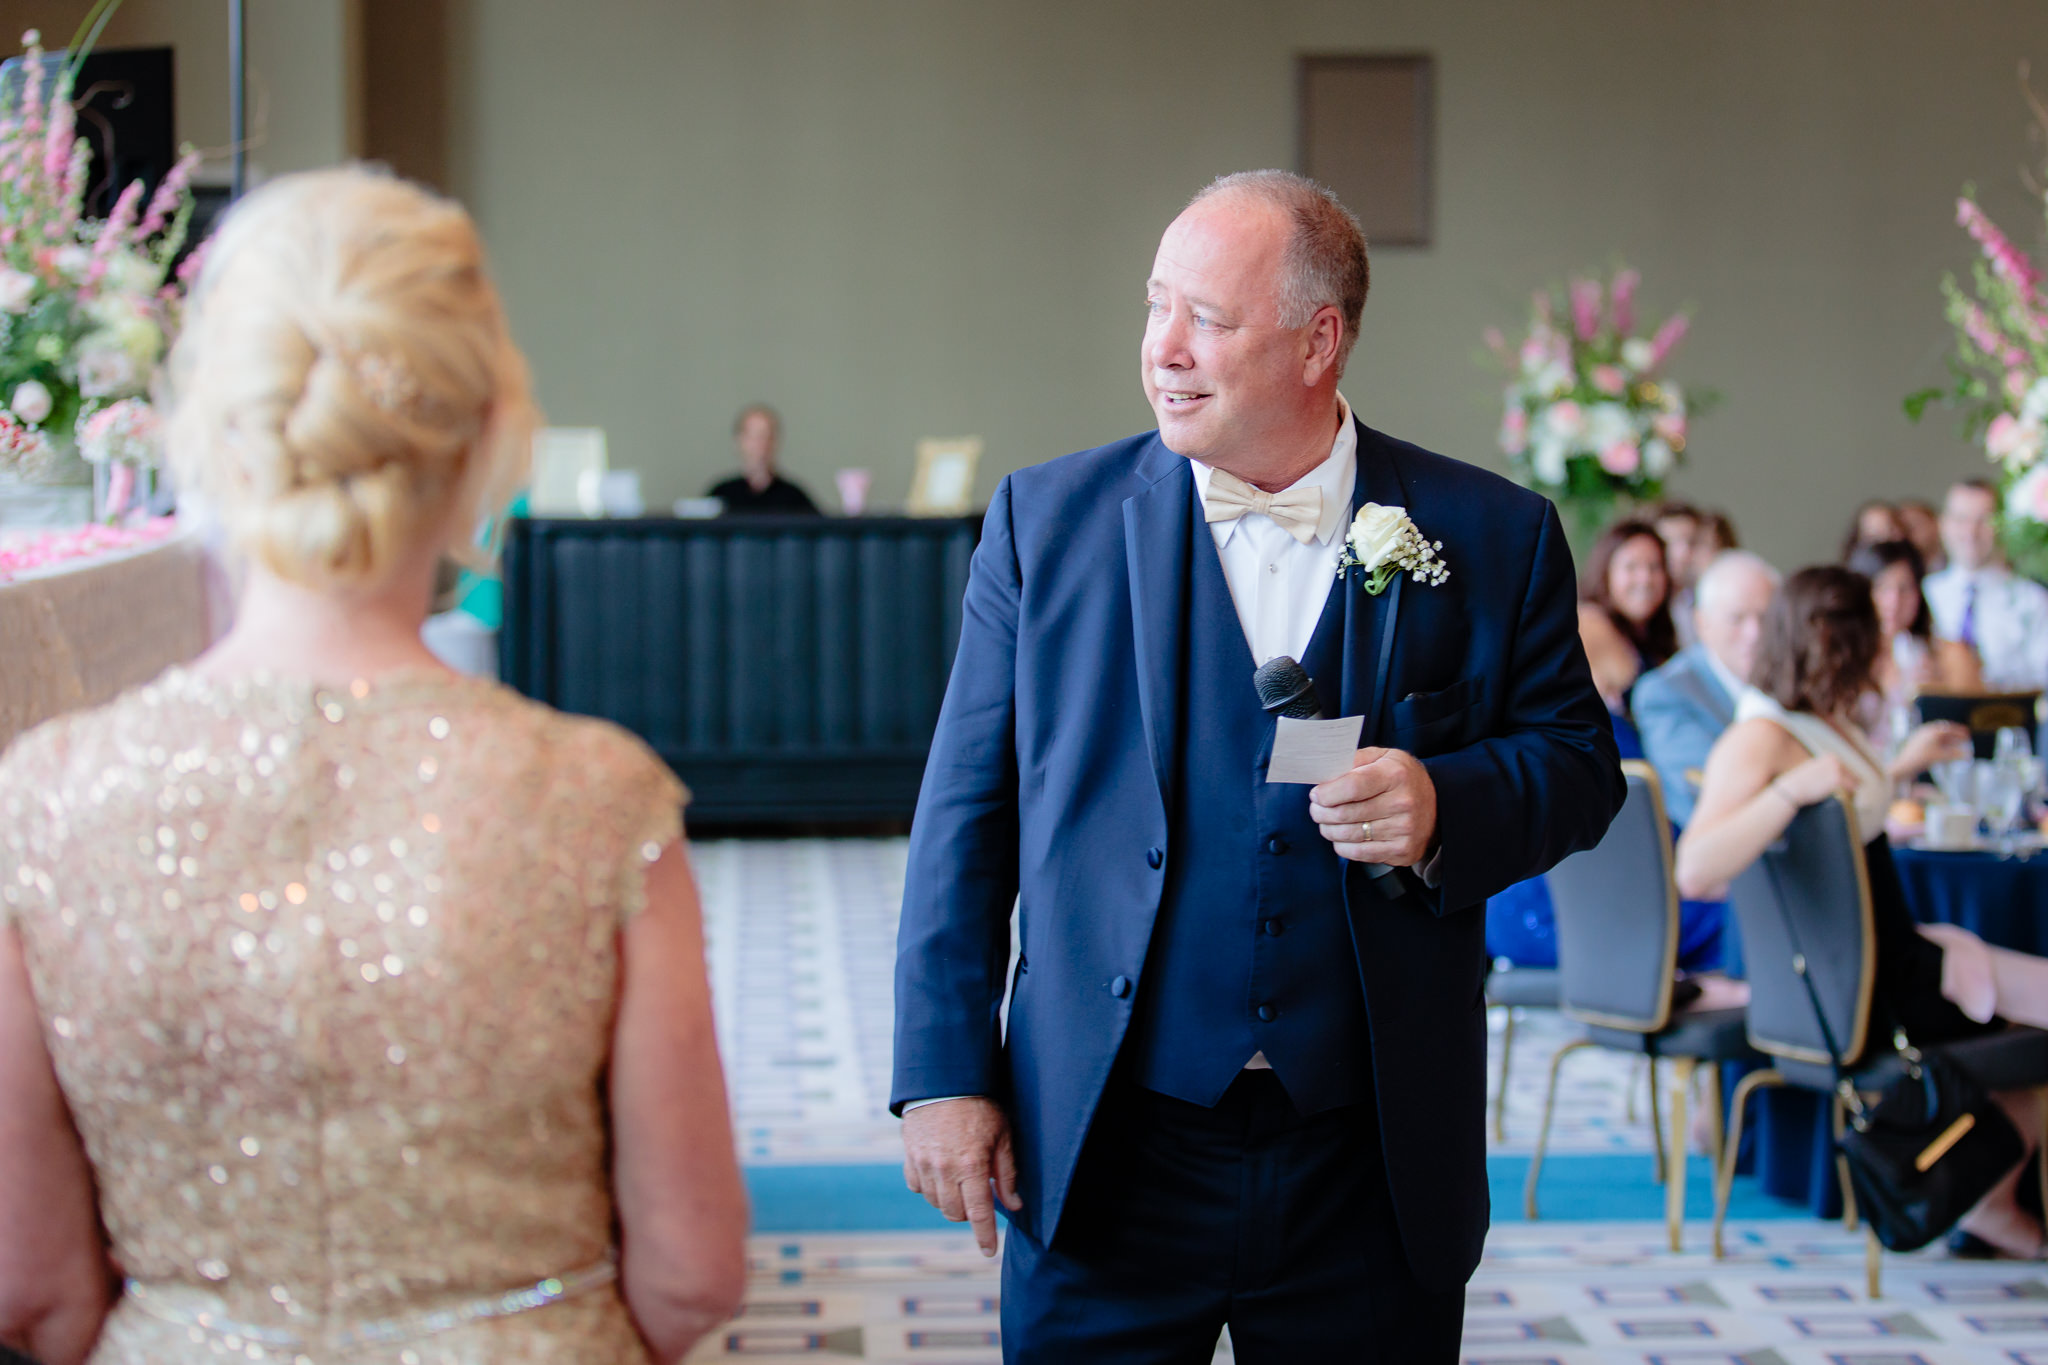 Father of the bride speaks at his daughter's wedding reception at Duquesne University